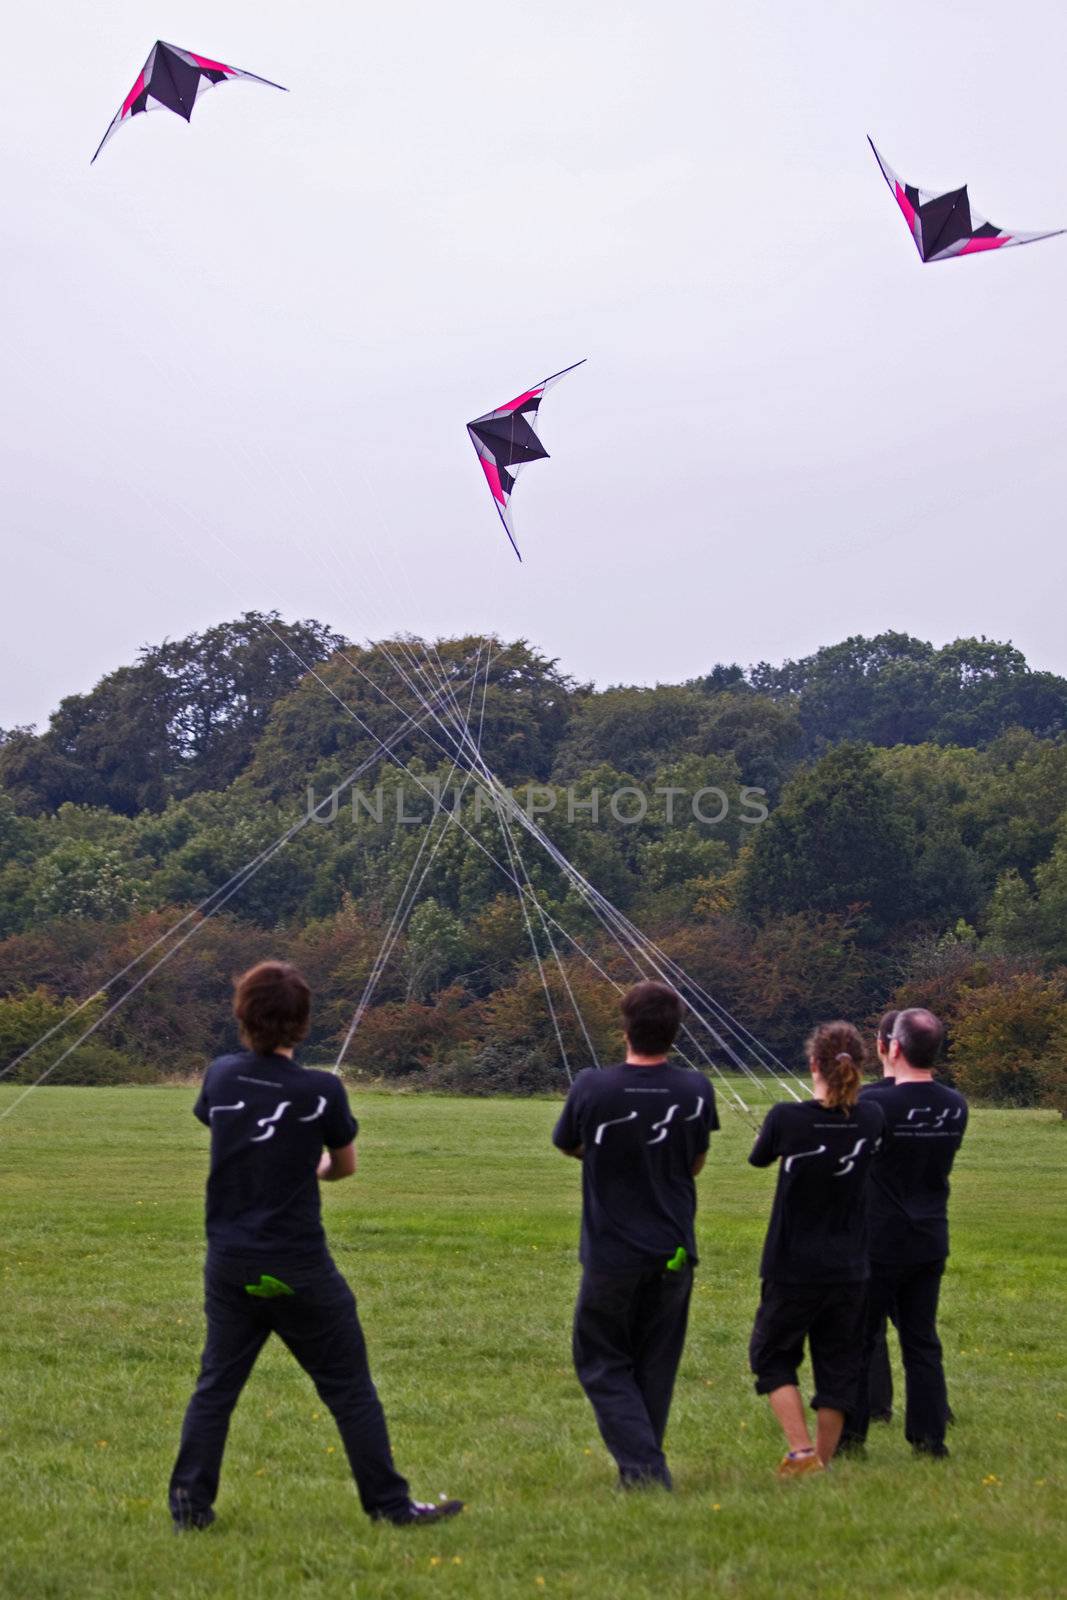 BRISTOL, ENGLAND - SEPTEMBER 4: Members of a kite flying team coping with a strong wind at the International Kite Festival in Bristol, England on September 4, 2010